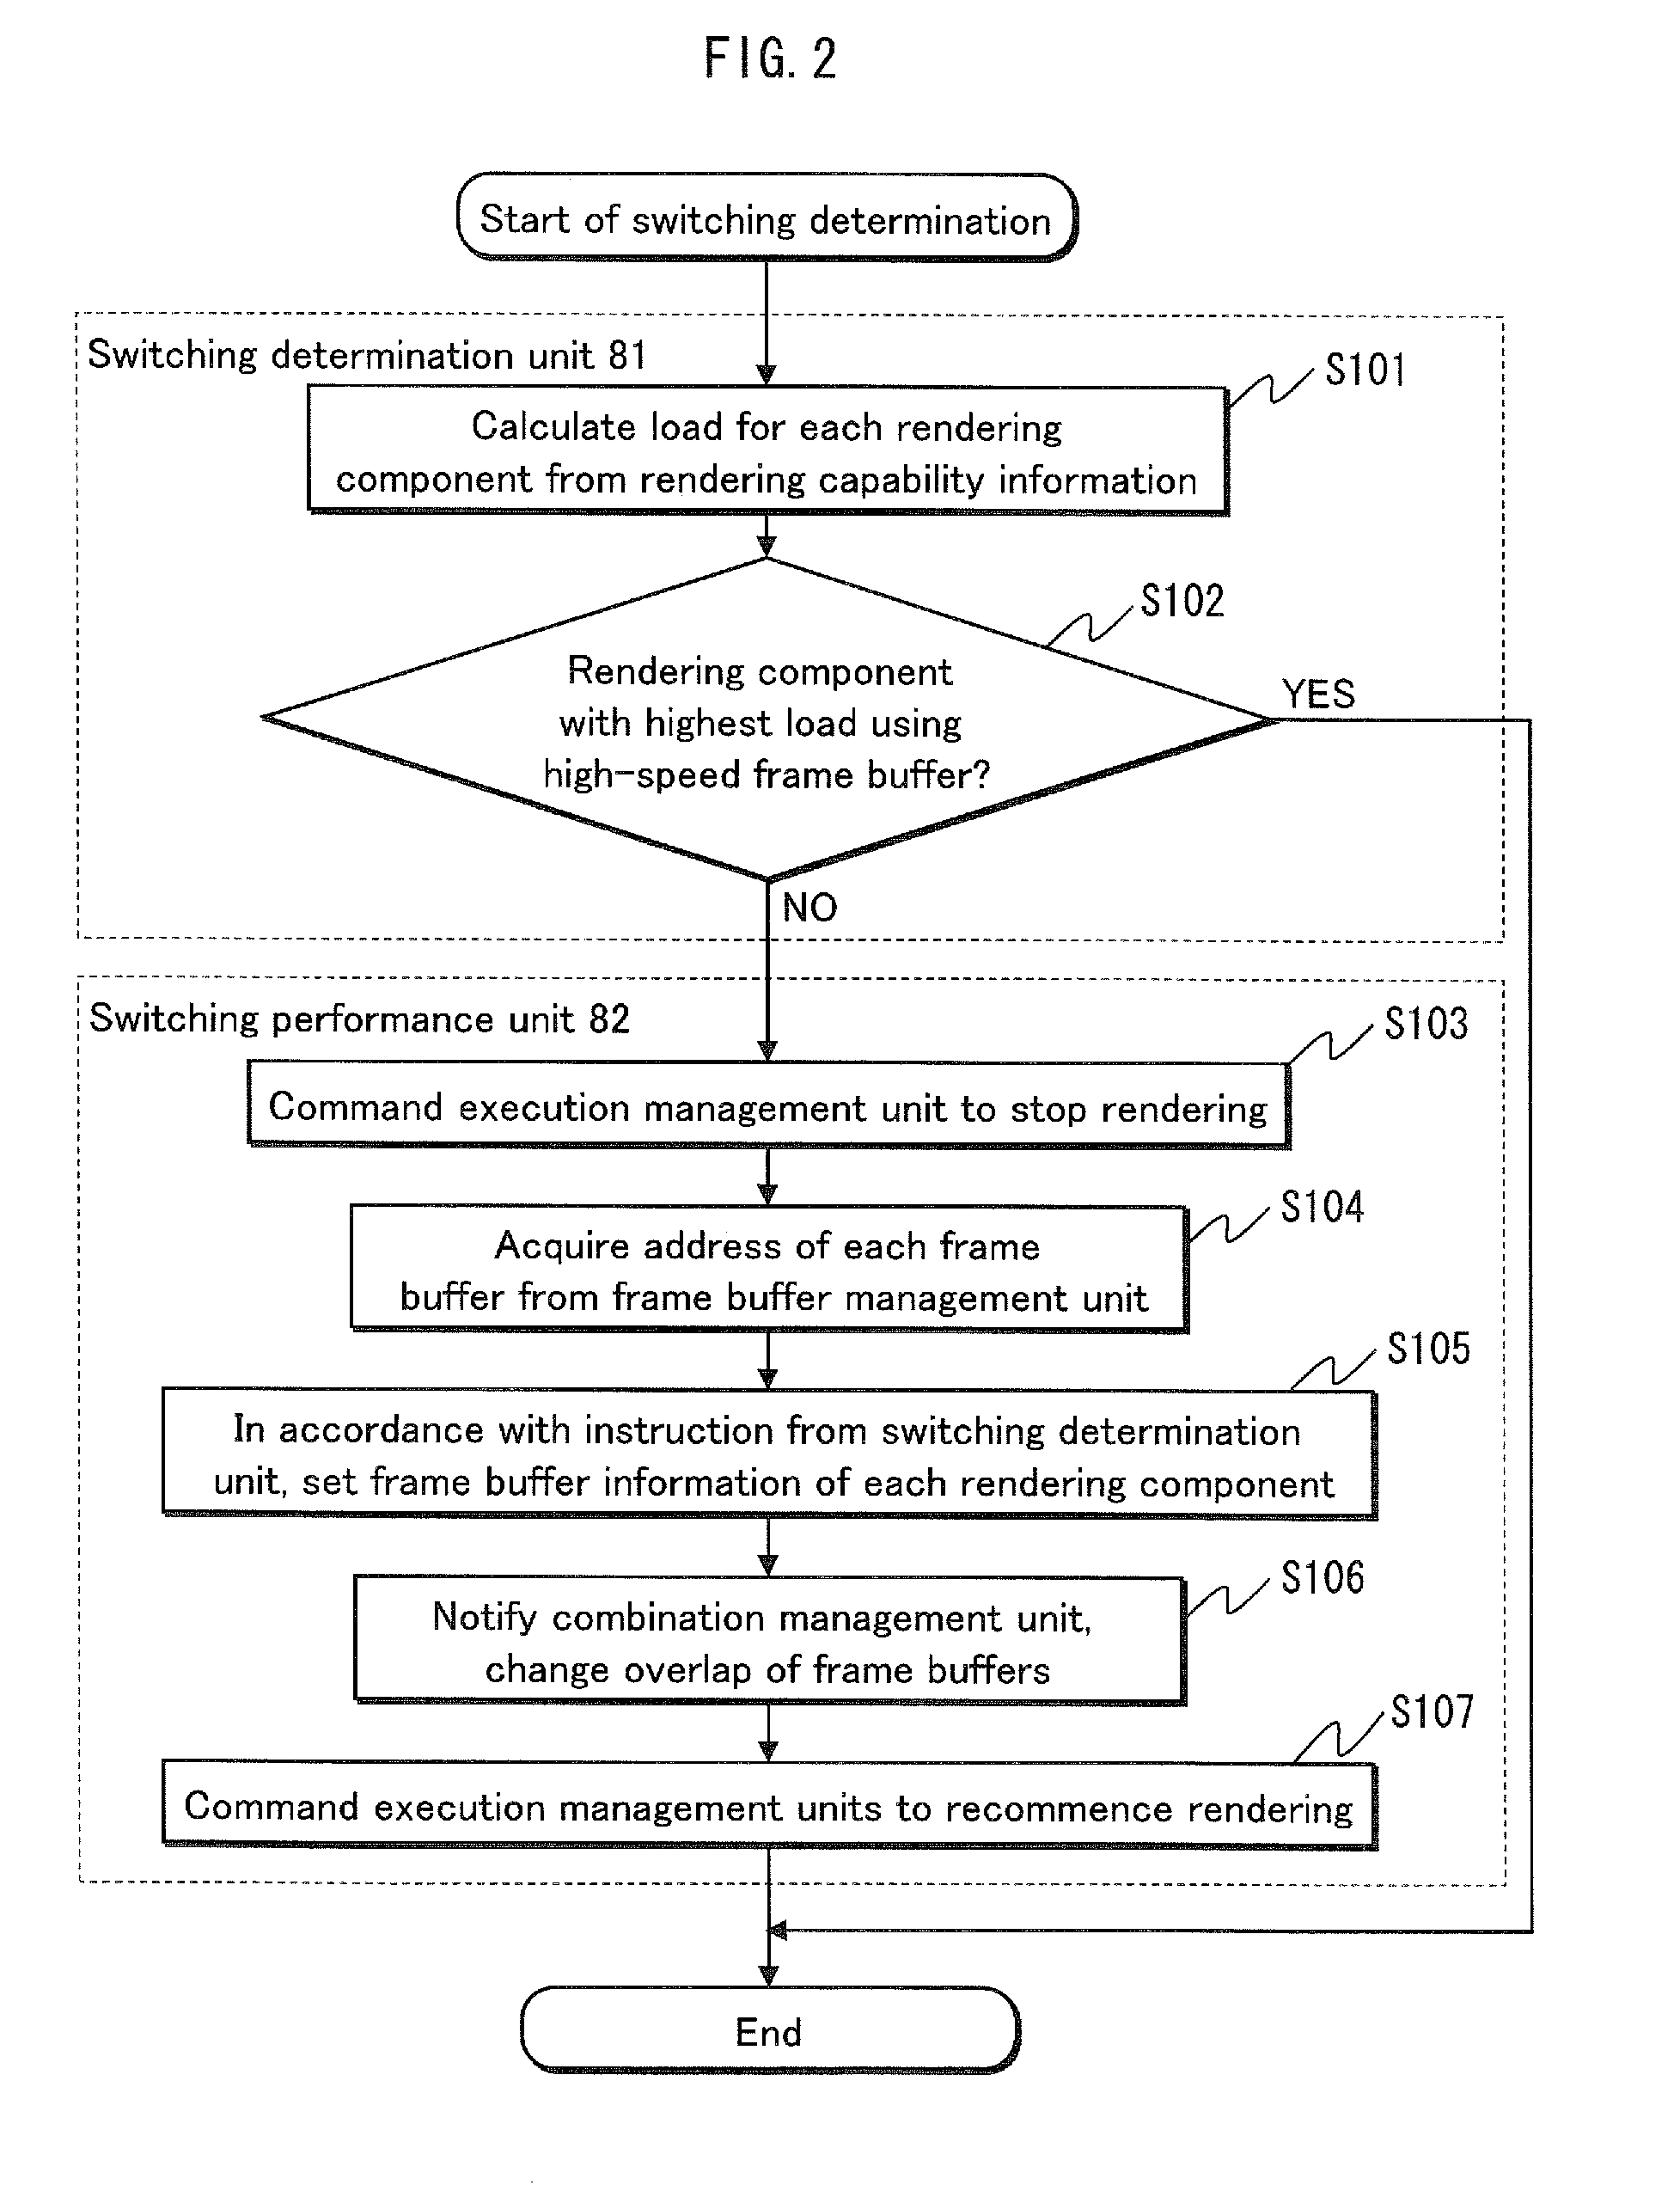 Display switching device